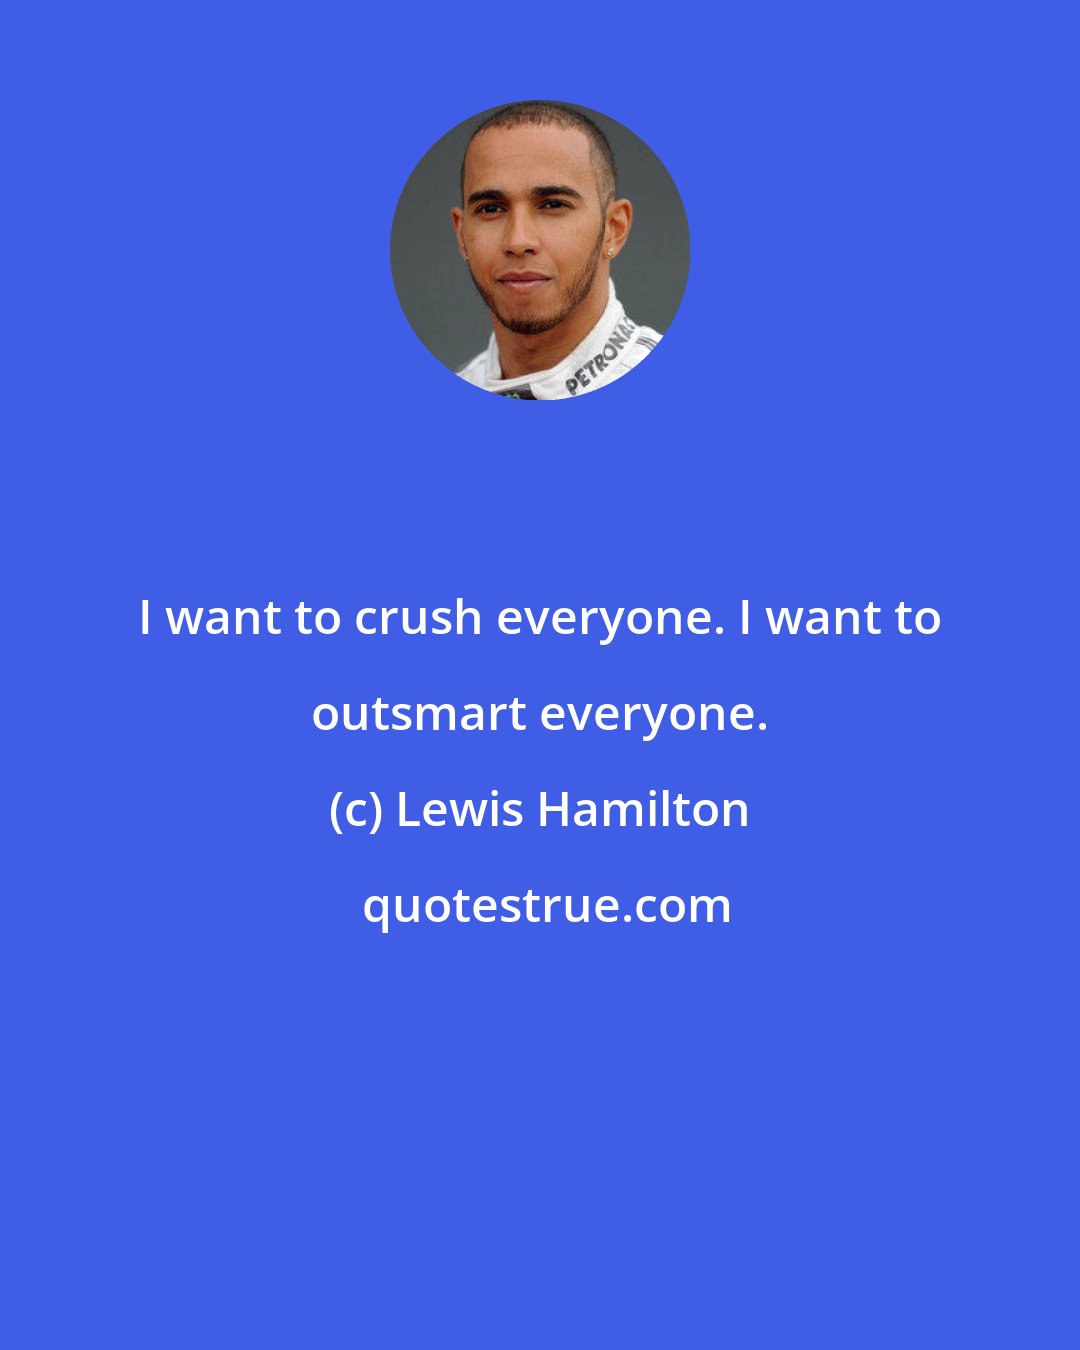 Lewis Hamilton: I want to crush everyone. I want to outsmart everyone.